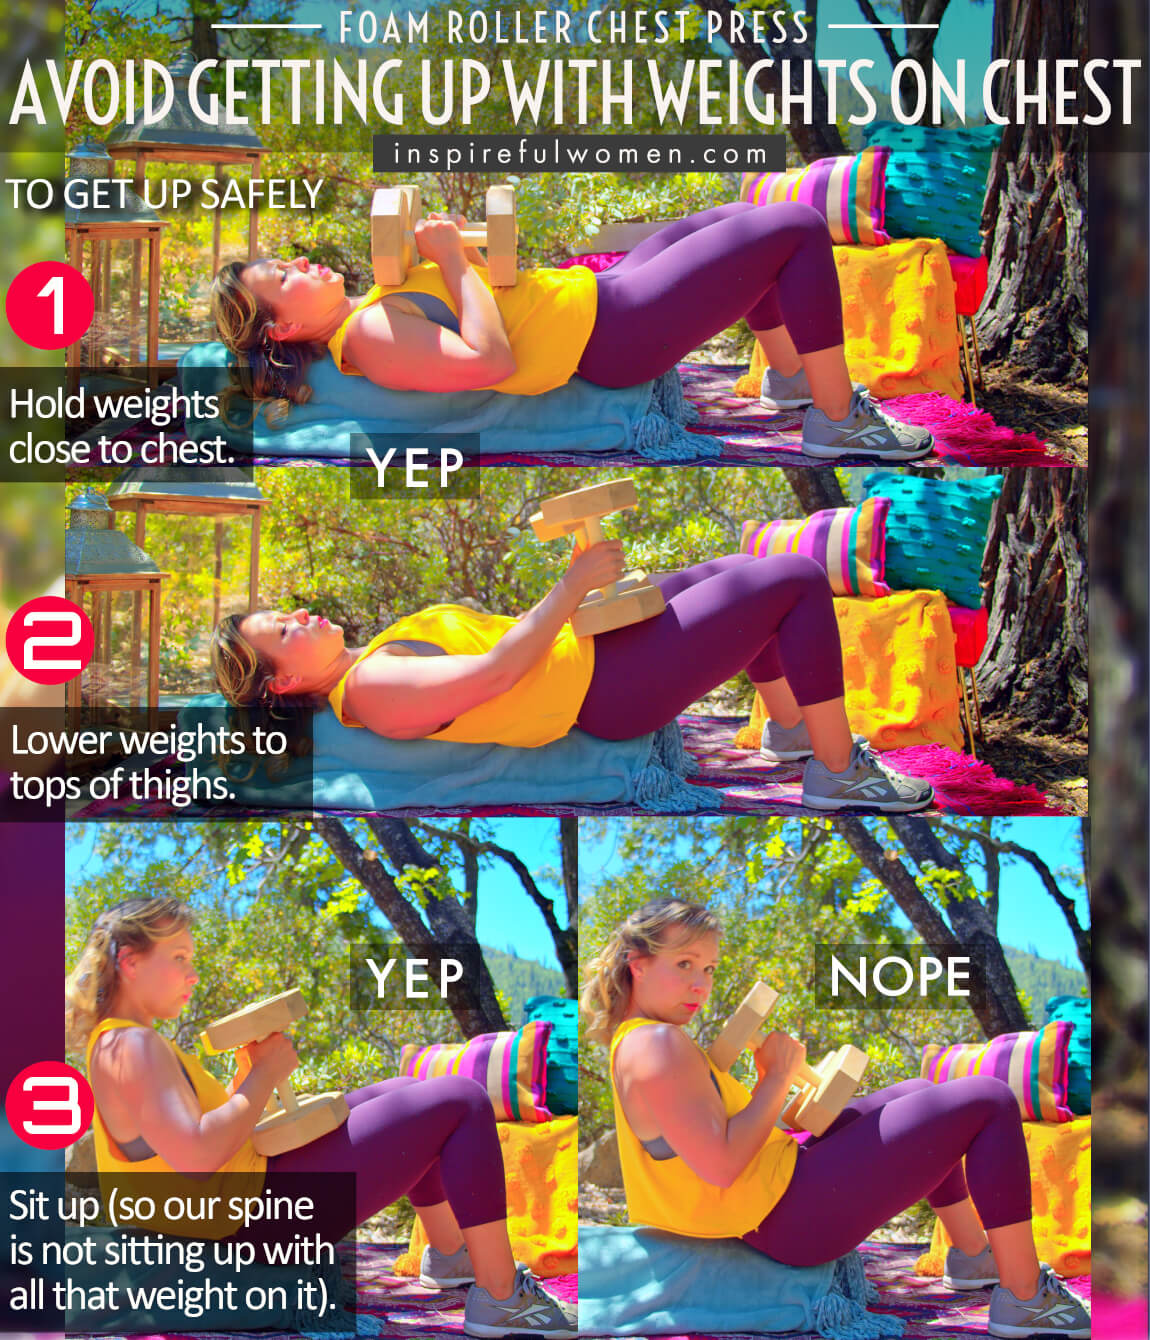 avoid-getting-up-with-weights-on-chest-foam-roller-chest-press-dumbbell-chest-exercise-common-mistakes